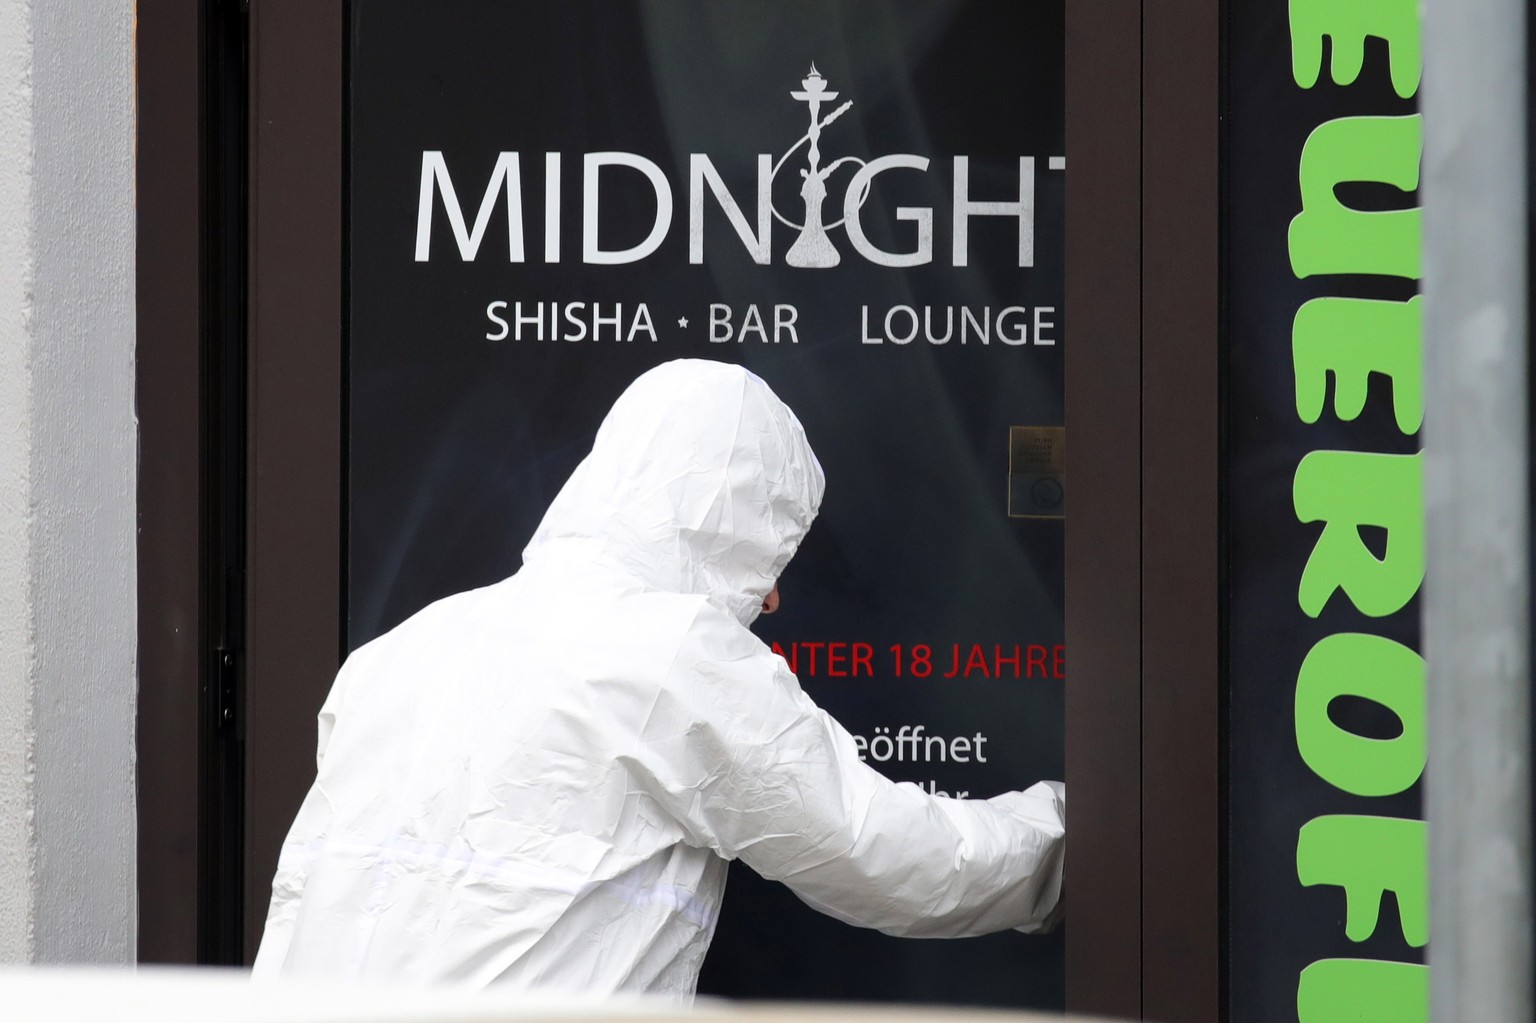 epa08229956 Police investigators enter Midnight shisha bar after two shootings in Hanau, Germany, 20 February 2020. At least nine people were killed in two shootings at shisha bars in Hanau, police sa ...